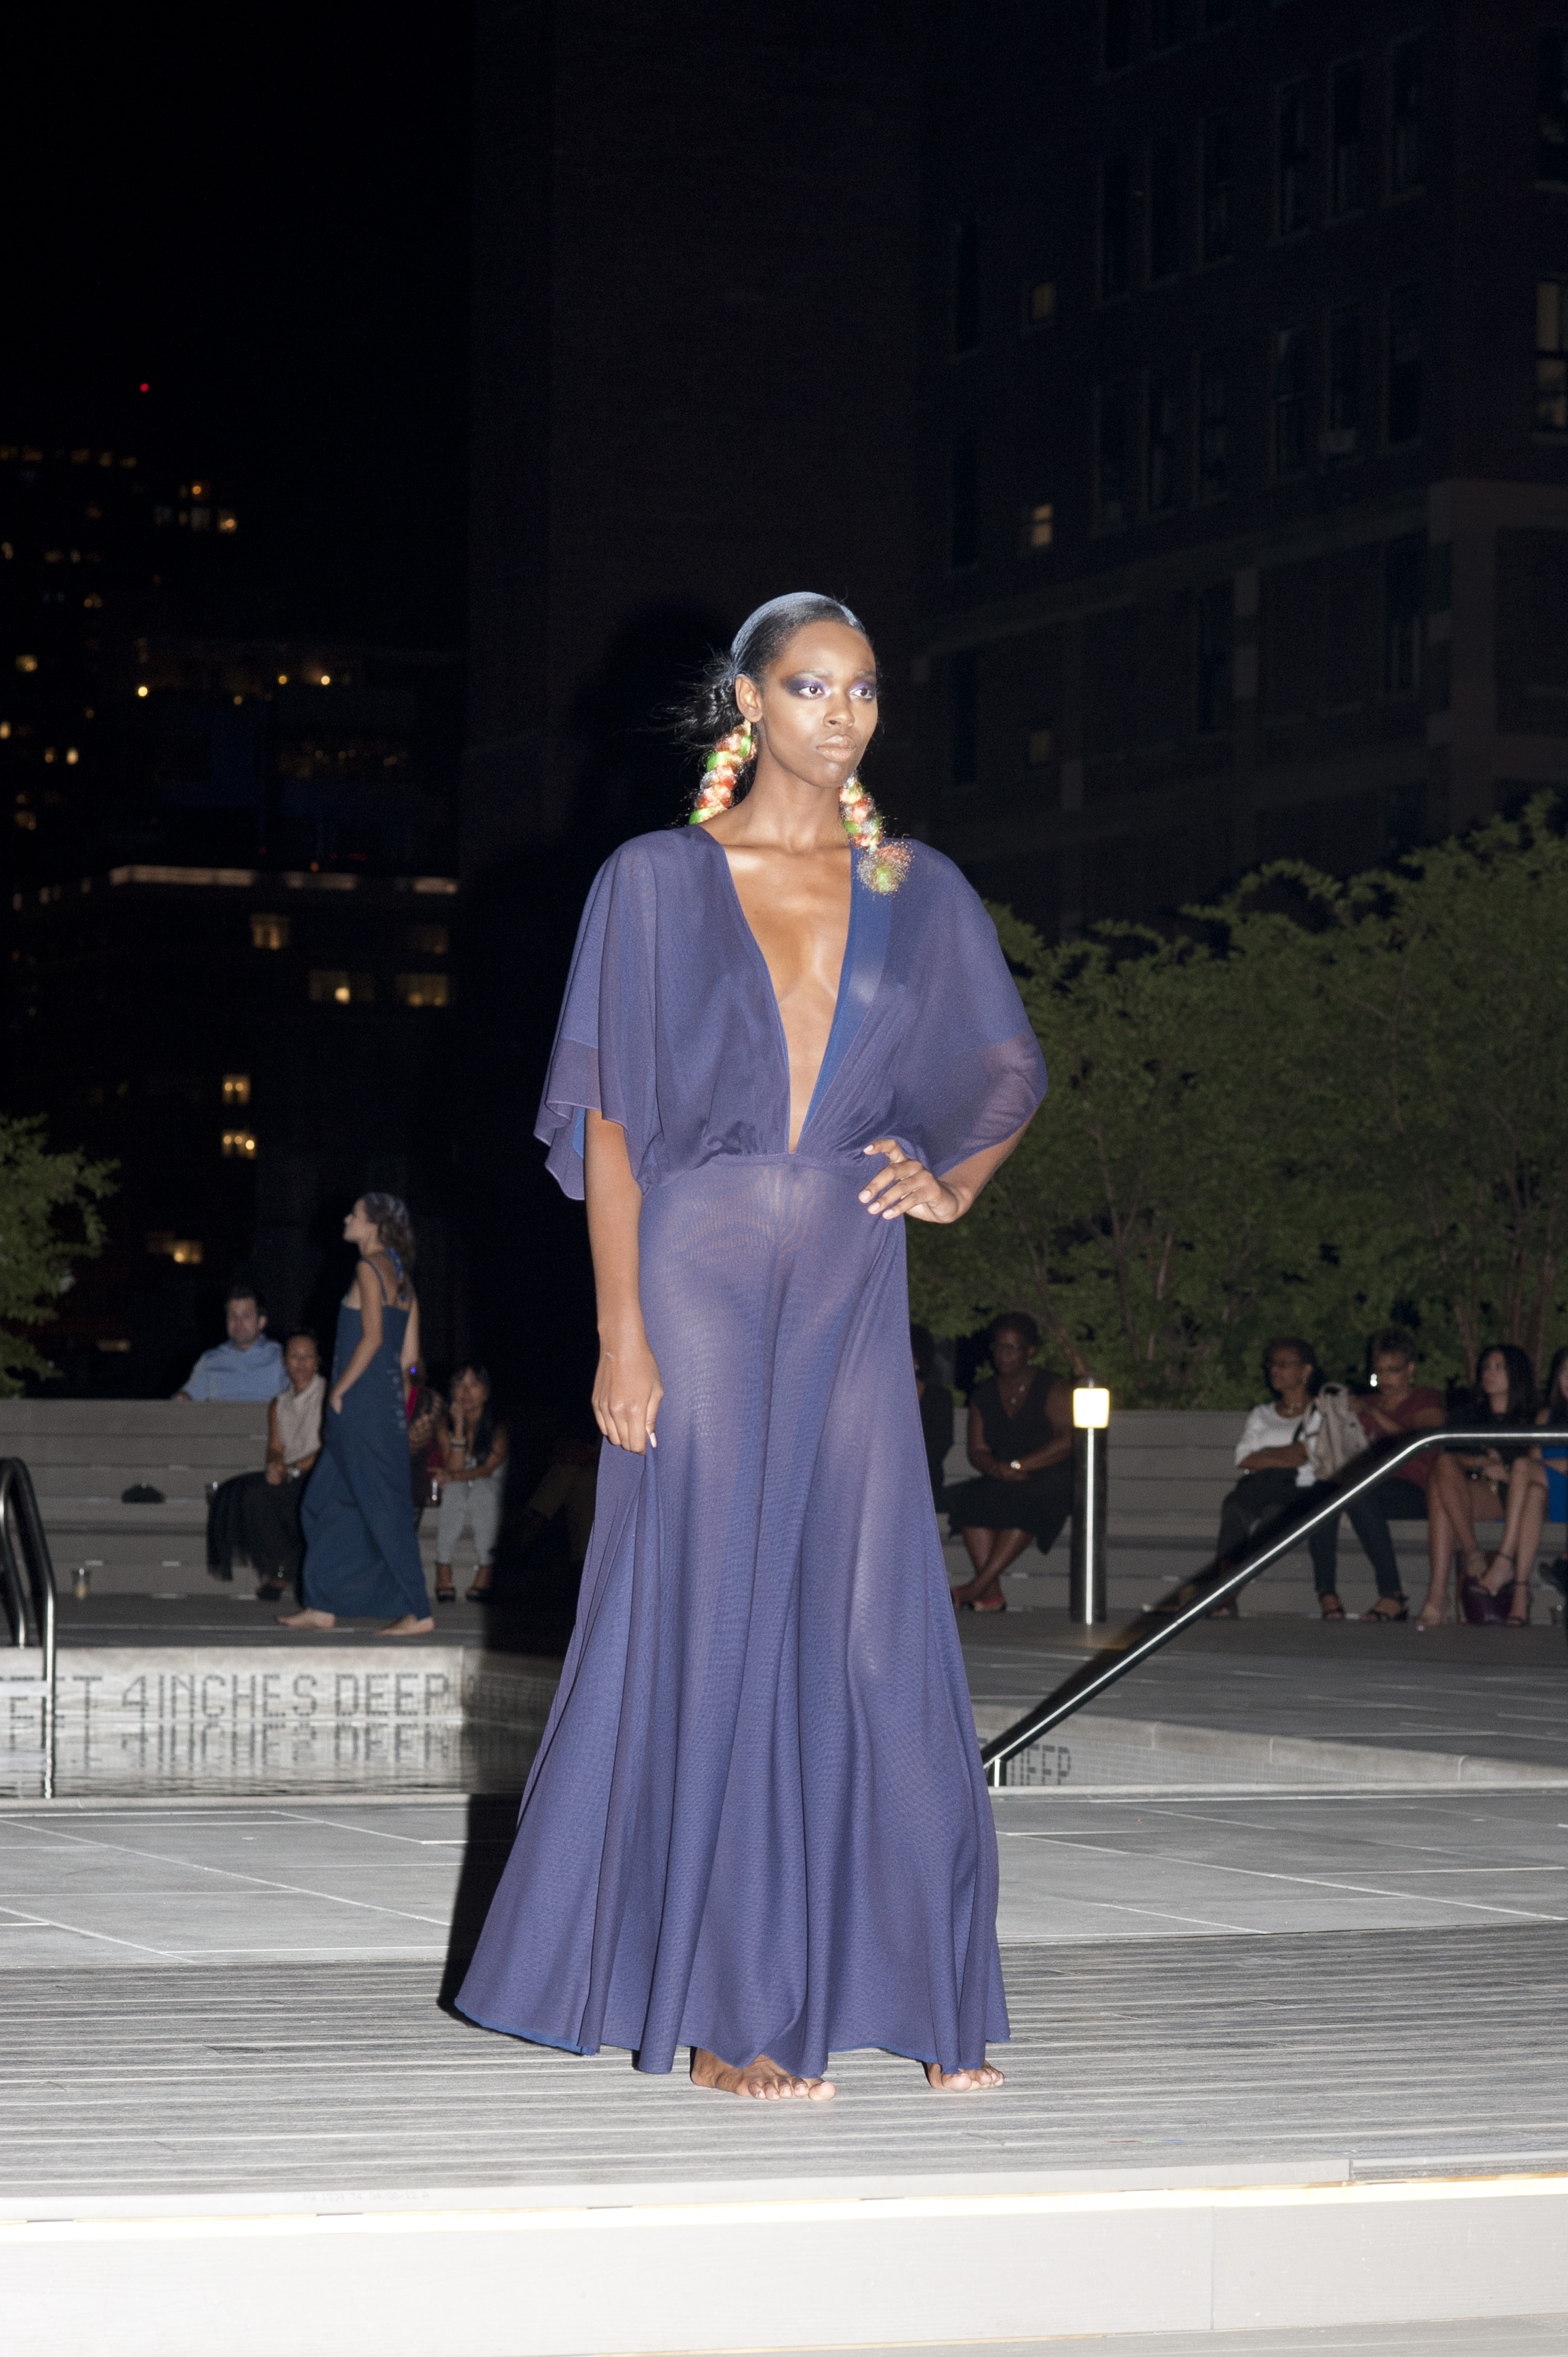 Makany Marta debuts her collection during Fashion Week in The Journey